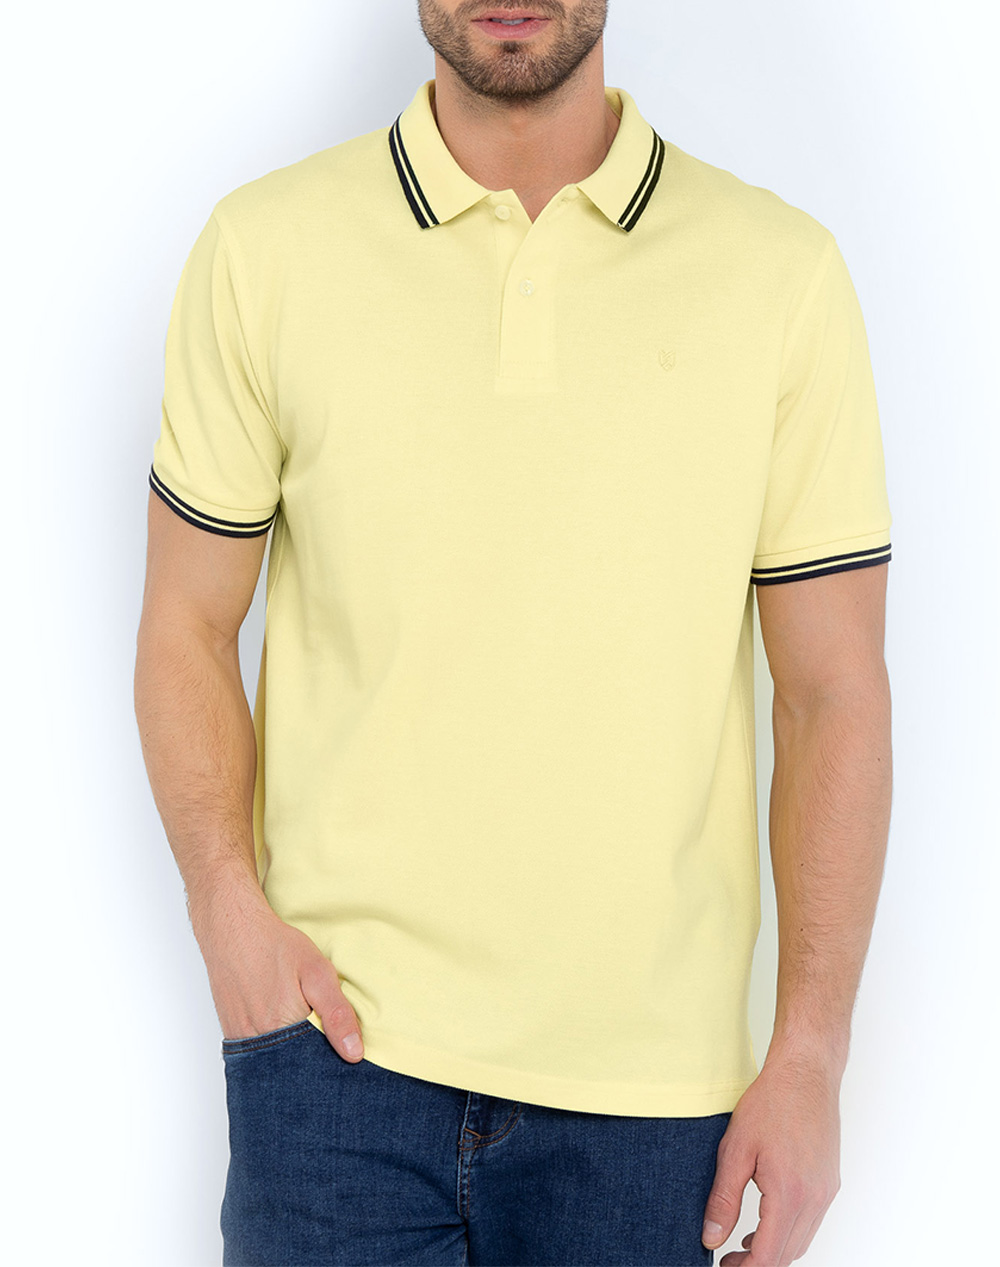 THE BOSTONIANS ΜΠΛΟΥΖΑ POLO PIQUE TWIN TIPPED REGULAR 3PS1271-LIGHT Yellow 3820ABOST3410093_XR30397